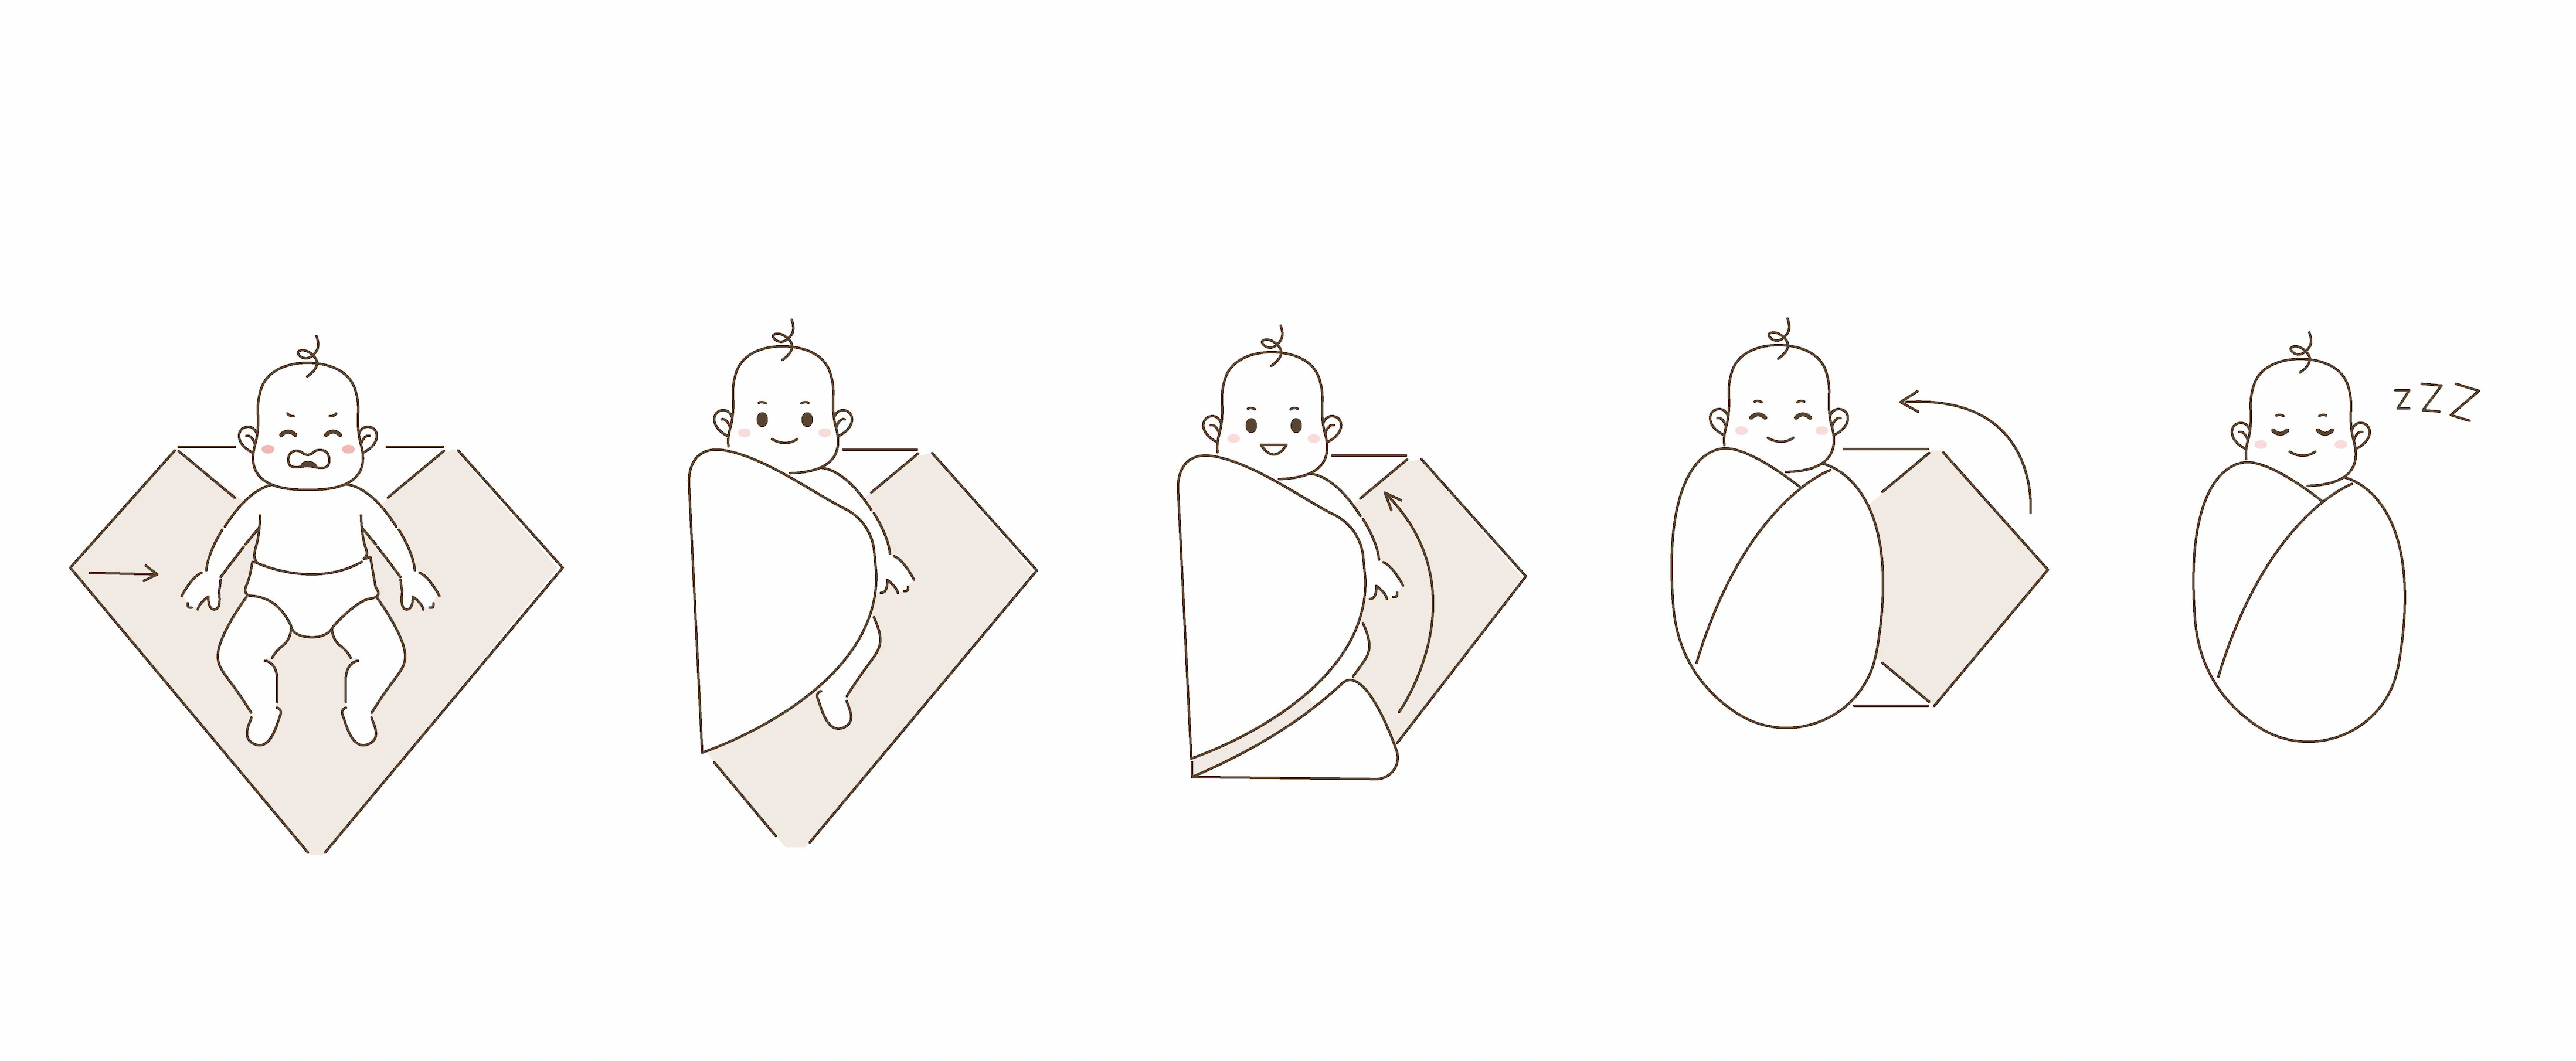 Follow these steps to learn how to do the perfect swaddle!